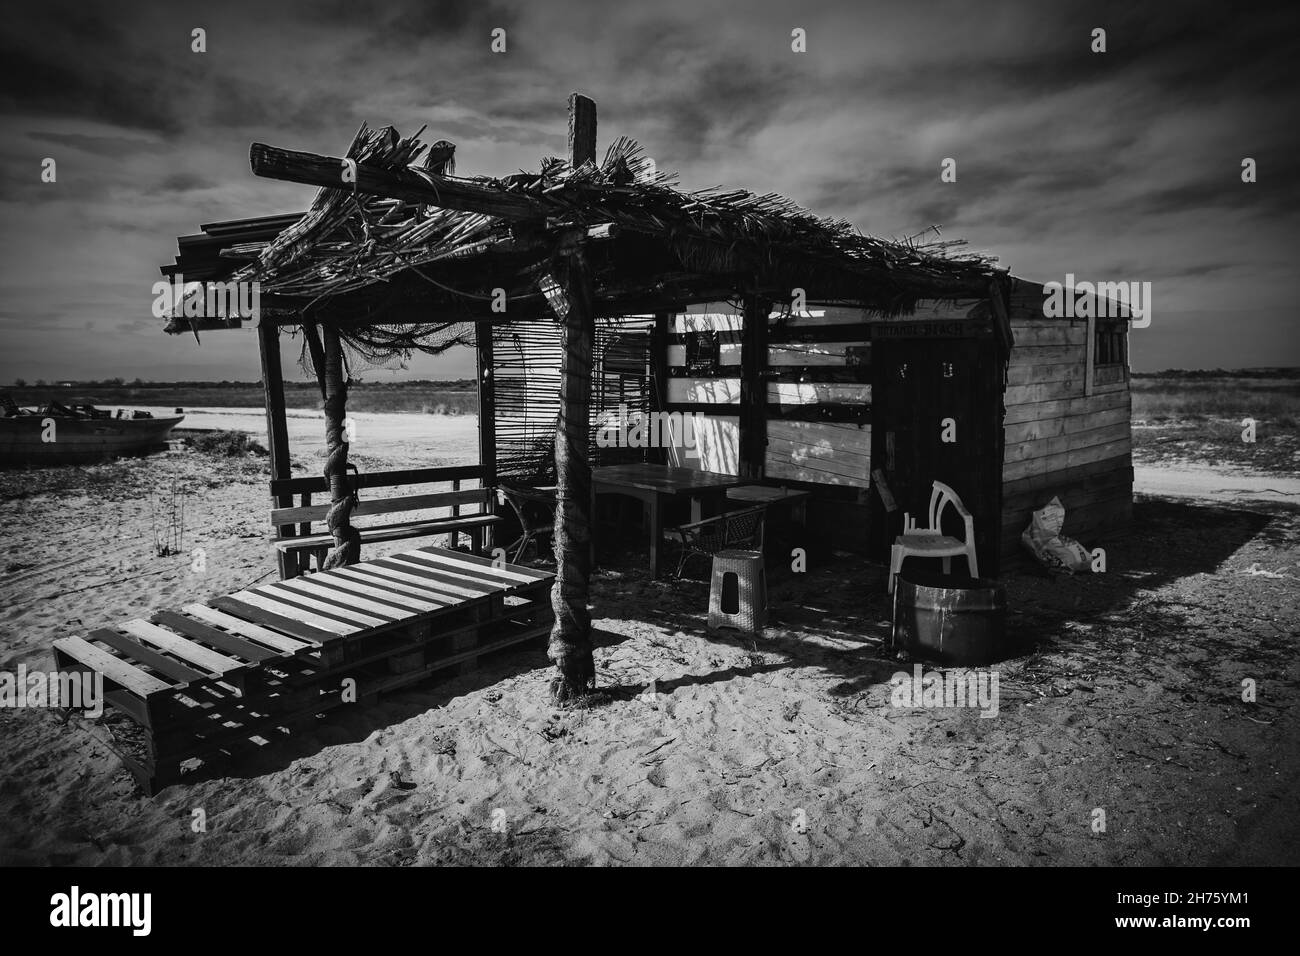 Small straw house on a sandy beach on a grayscale Stock Photo